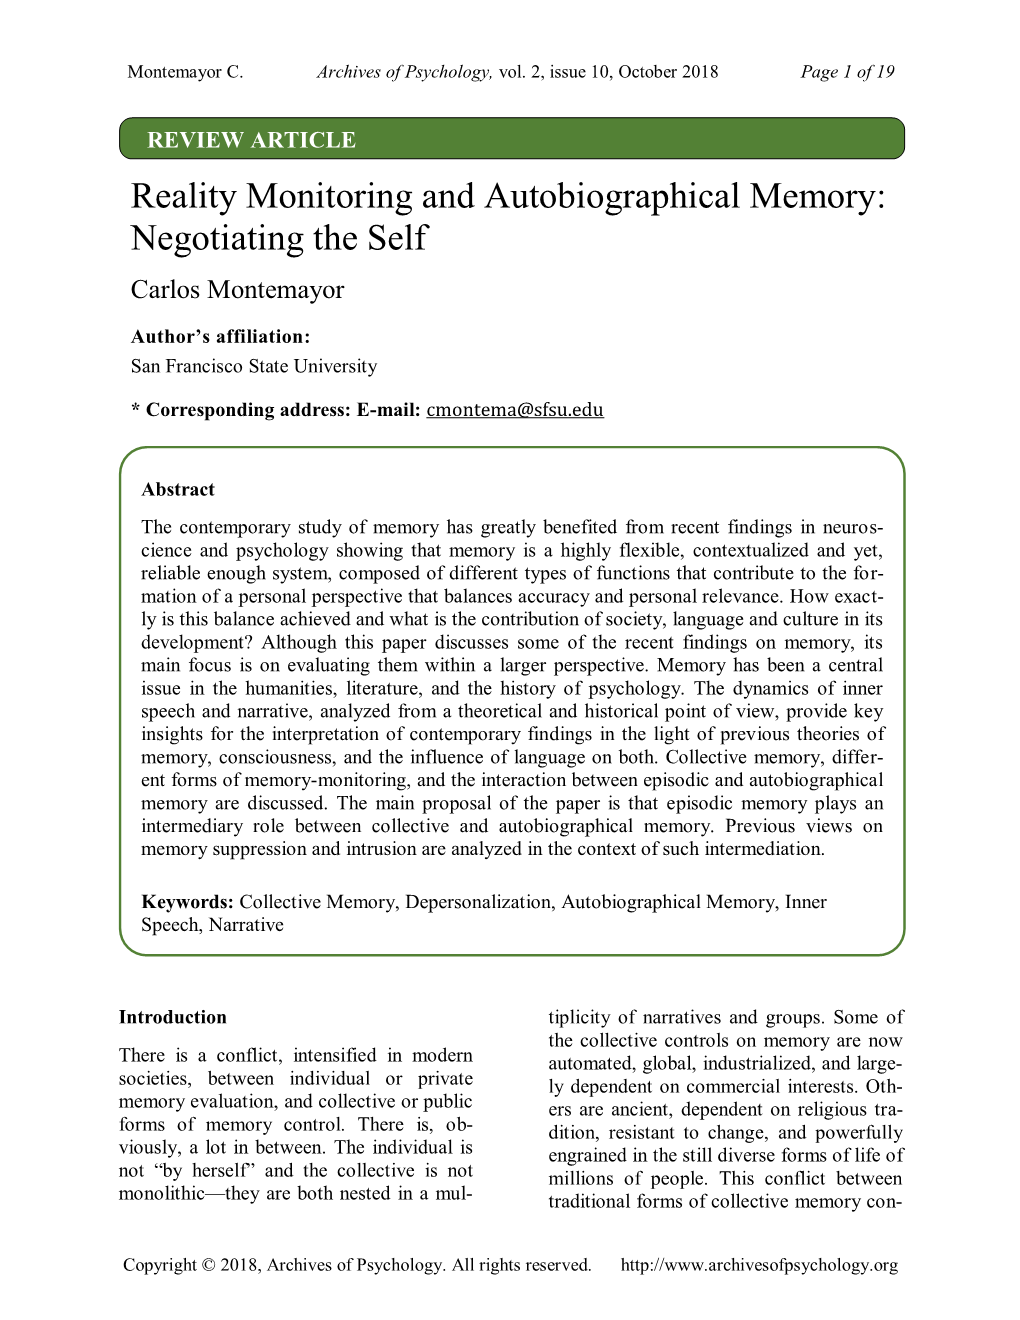 Reality Monitoring and Autobiographical Memory: Negotiating the Self Carlos Montemayor